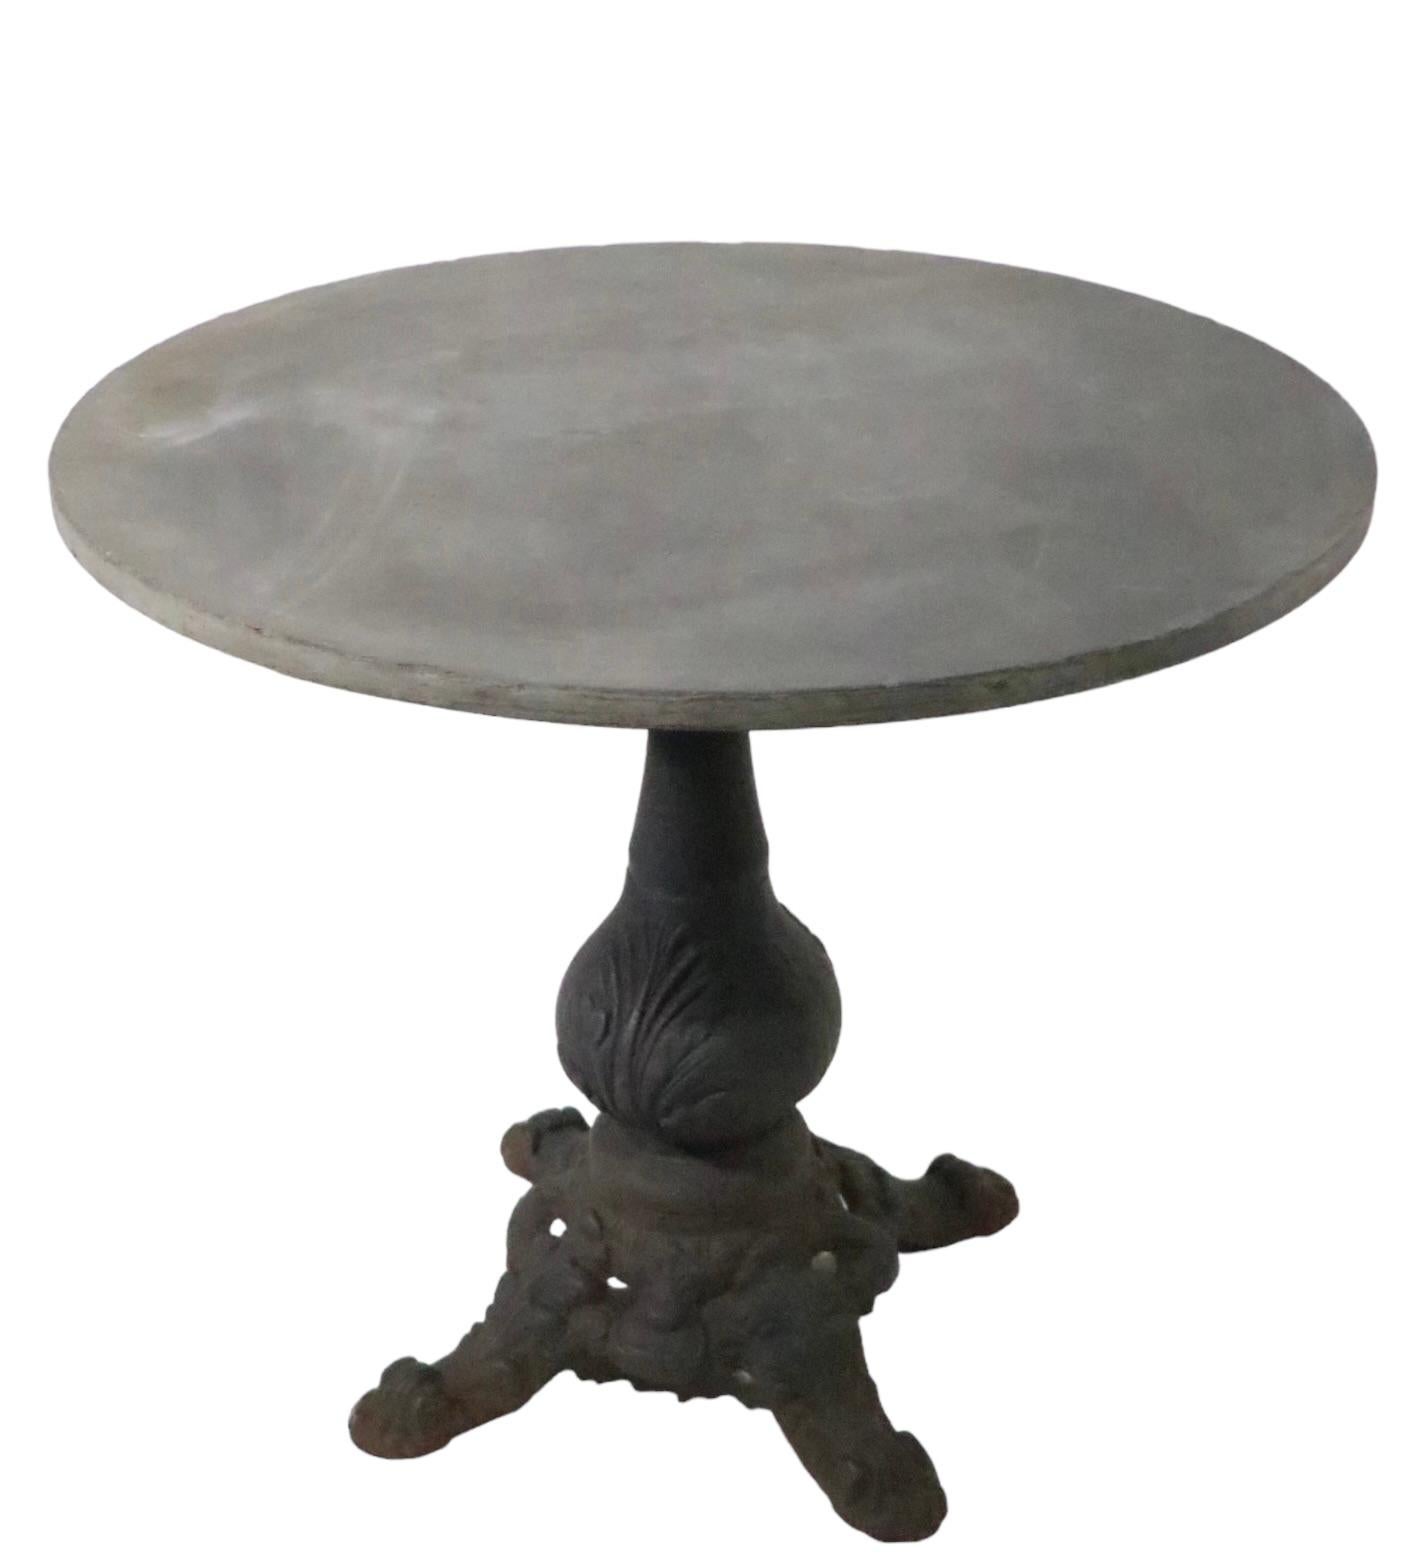 Victorian Granite Top Cast Iron Base French Style Cafe Bistro Garden Table c 1920 - 1950s For Sale